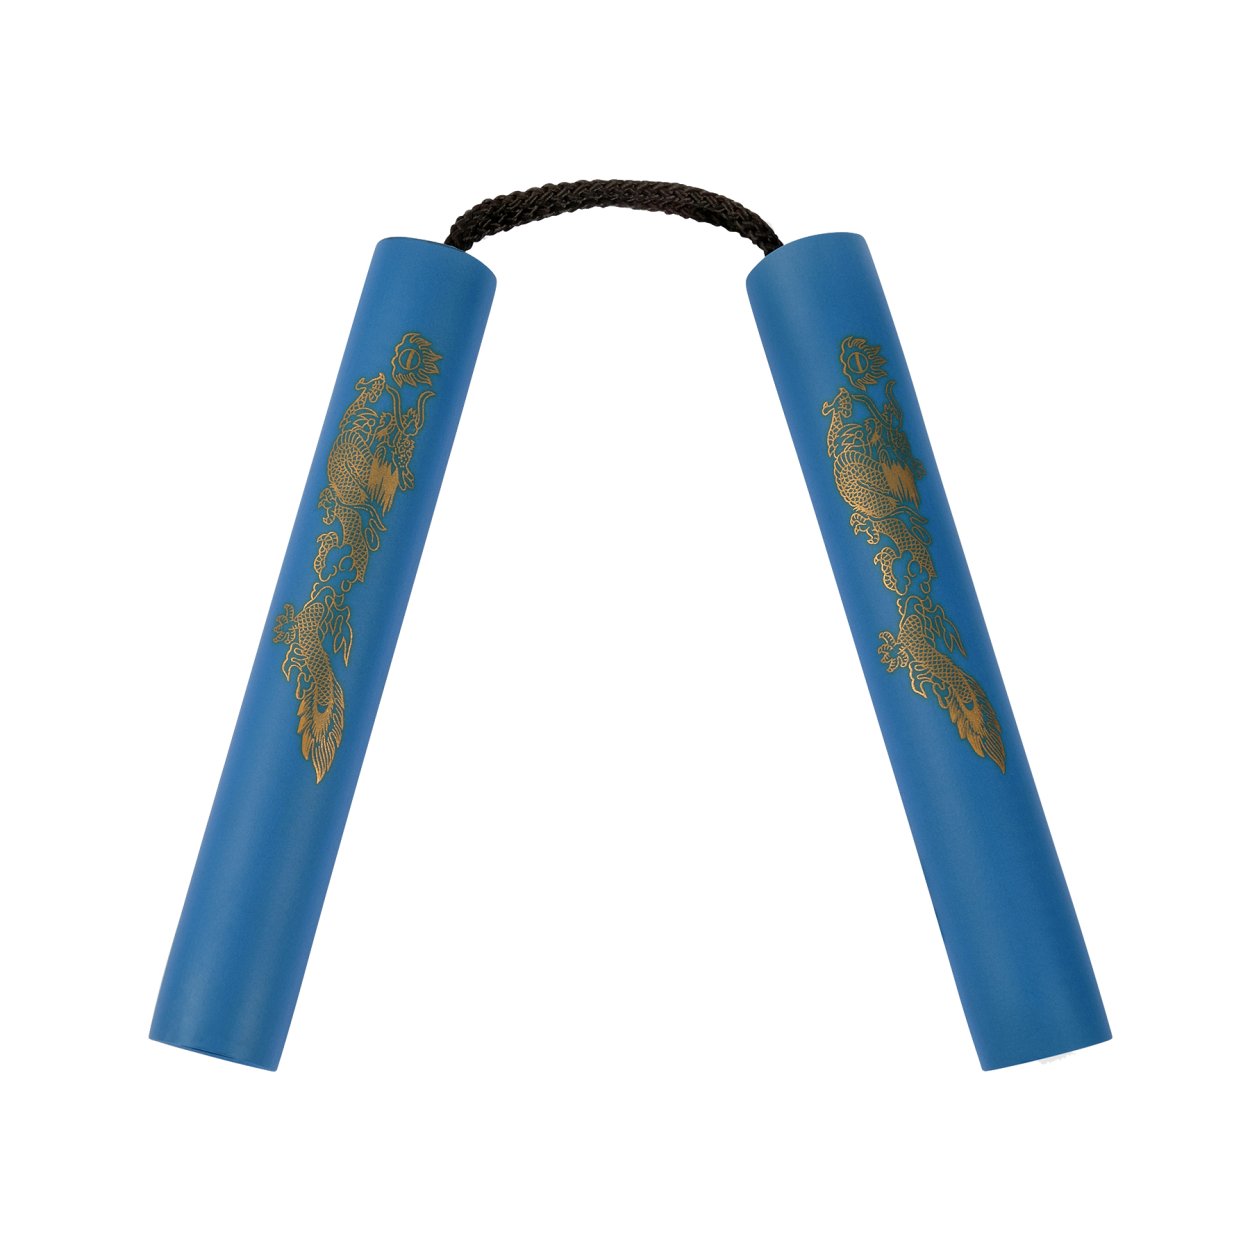 NR-002: 8 Inches Blue Nunchaku Foam with Cord - Click Image to Close